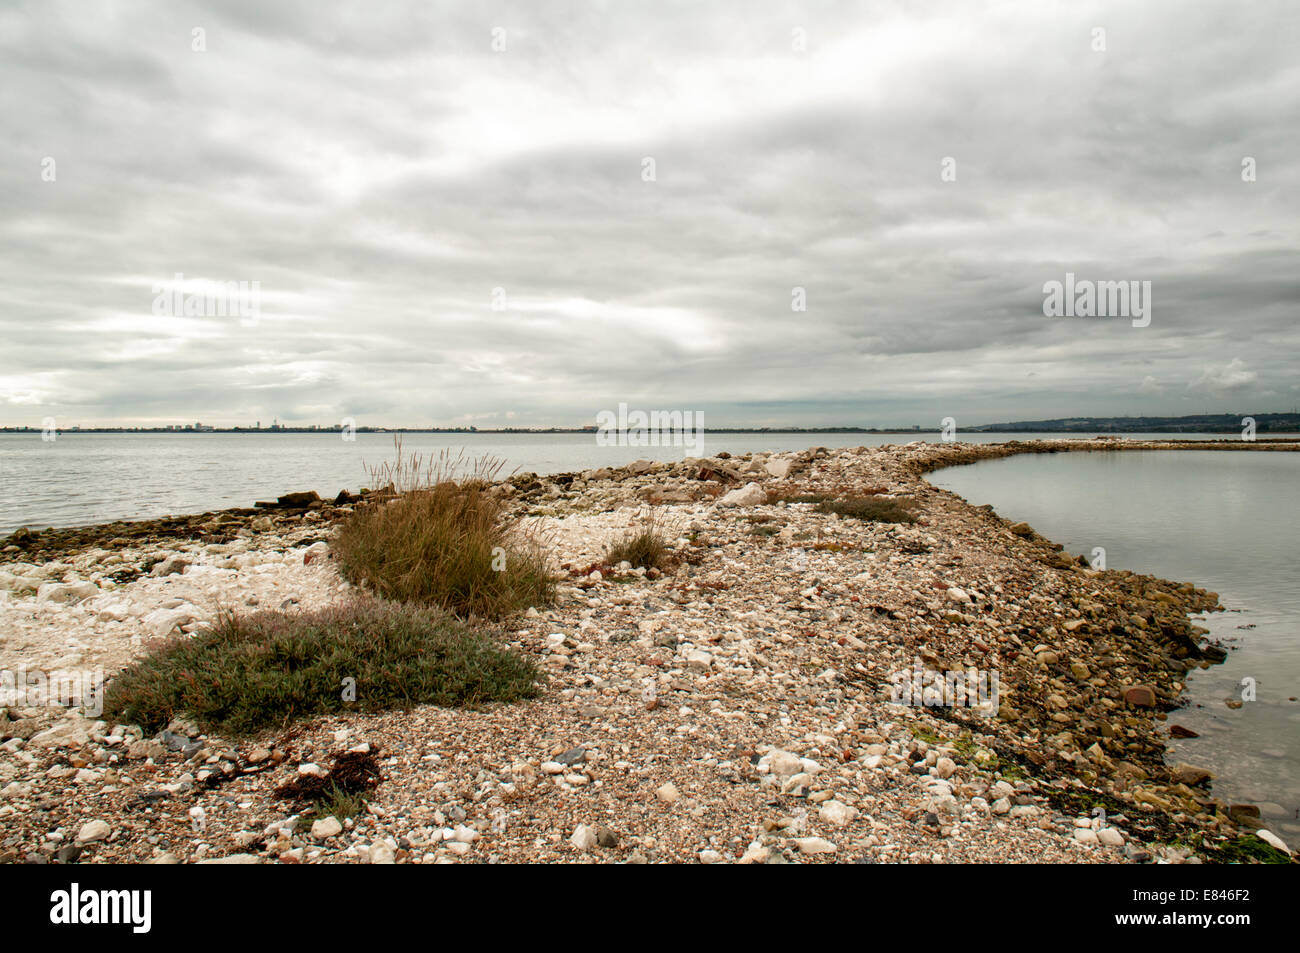 The Langstone Oysterbeds saline lagoon nature reserve for nesting birds Stock Photo